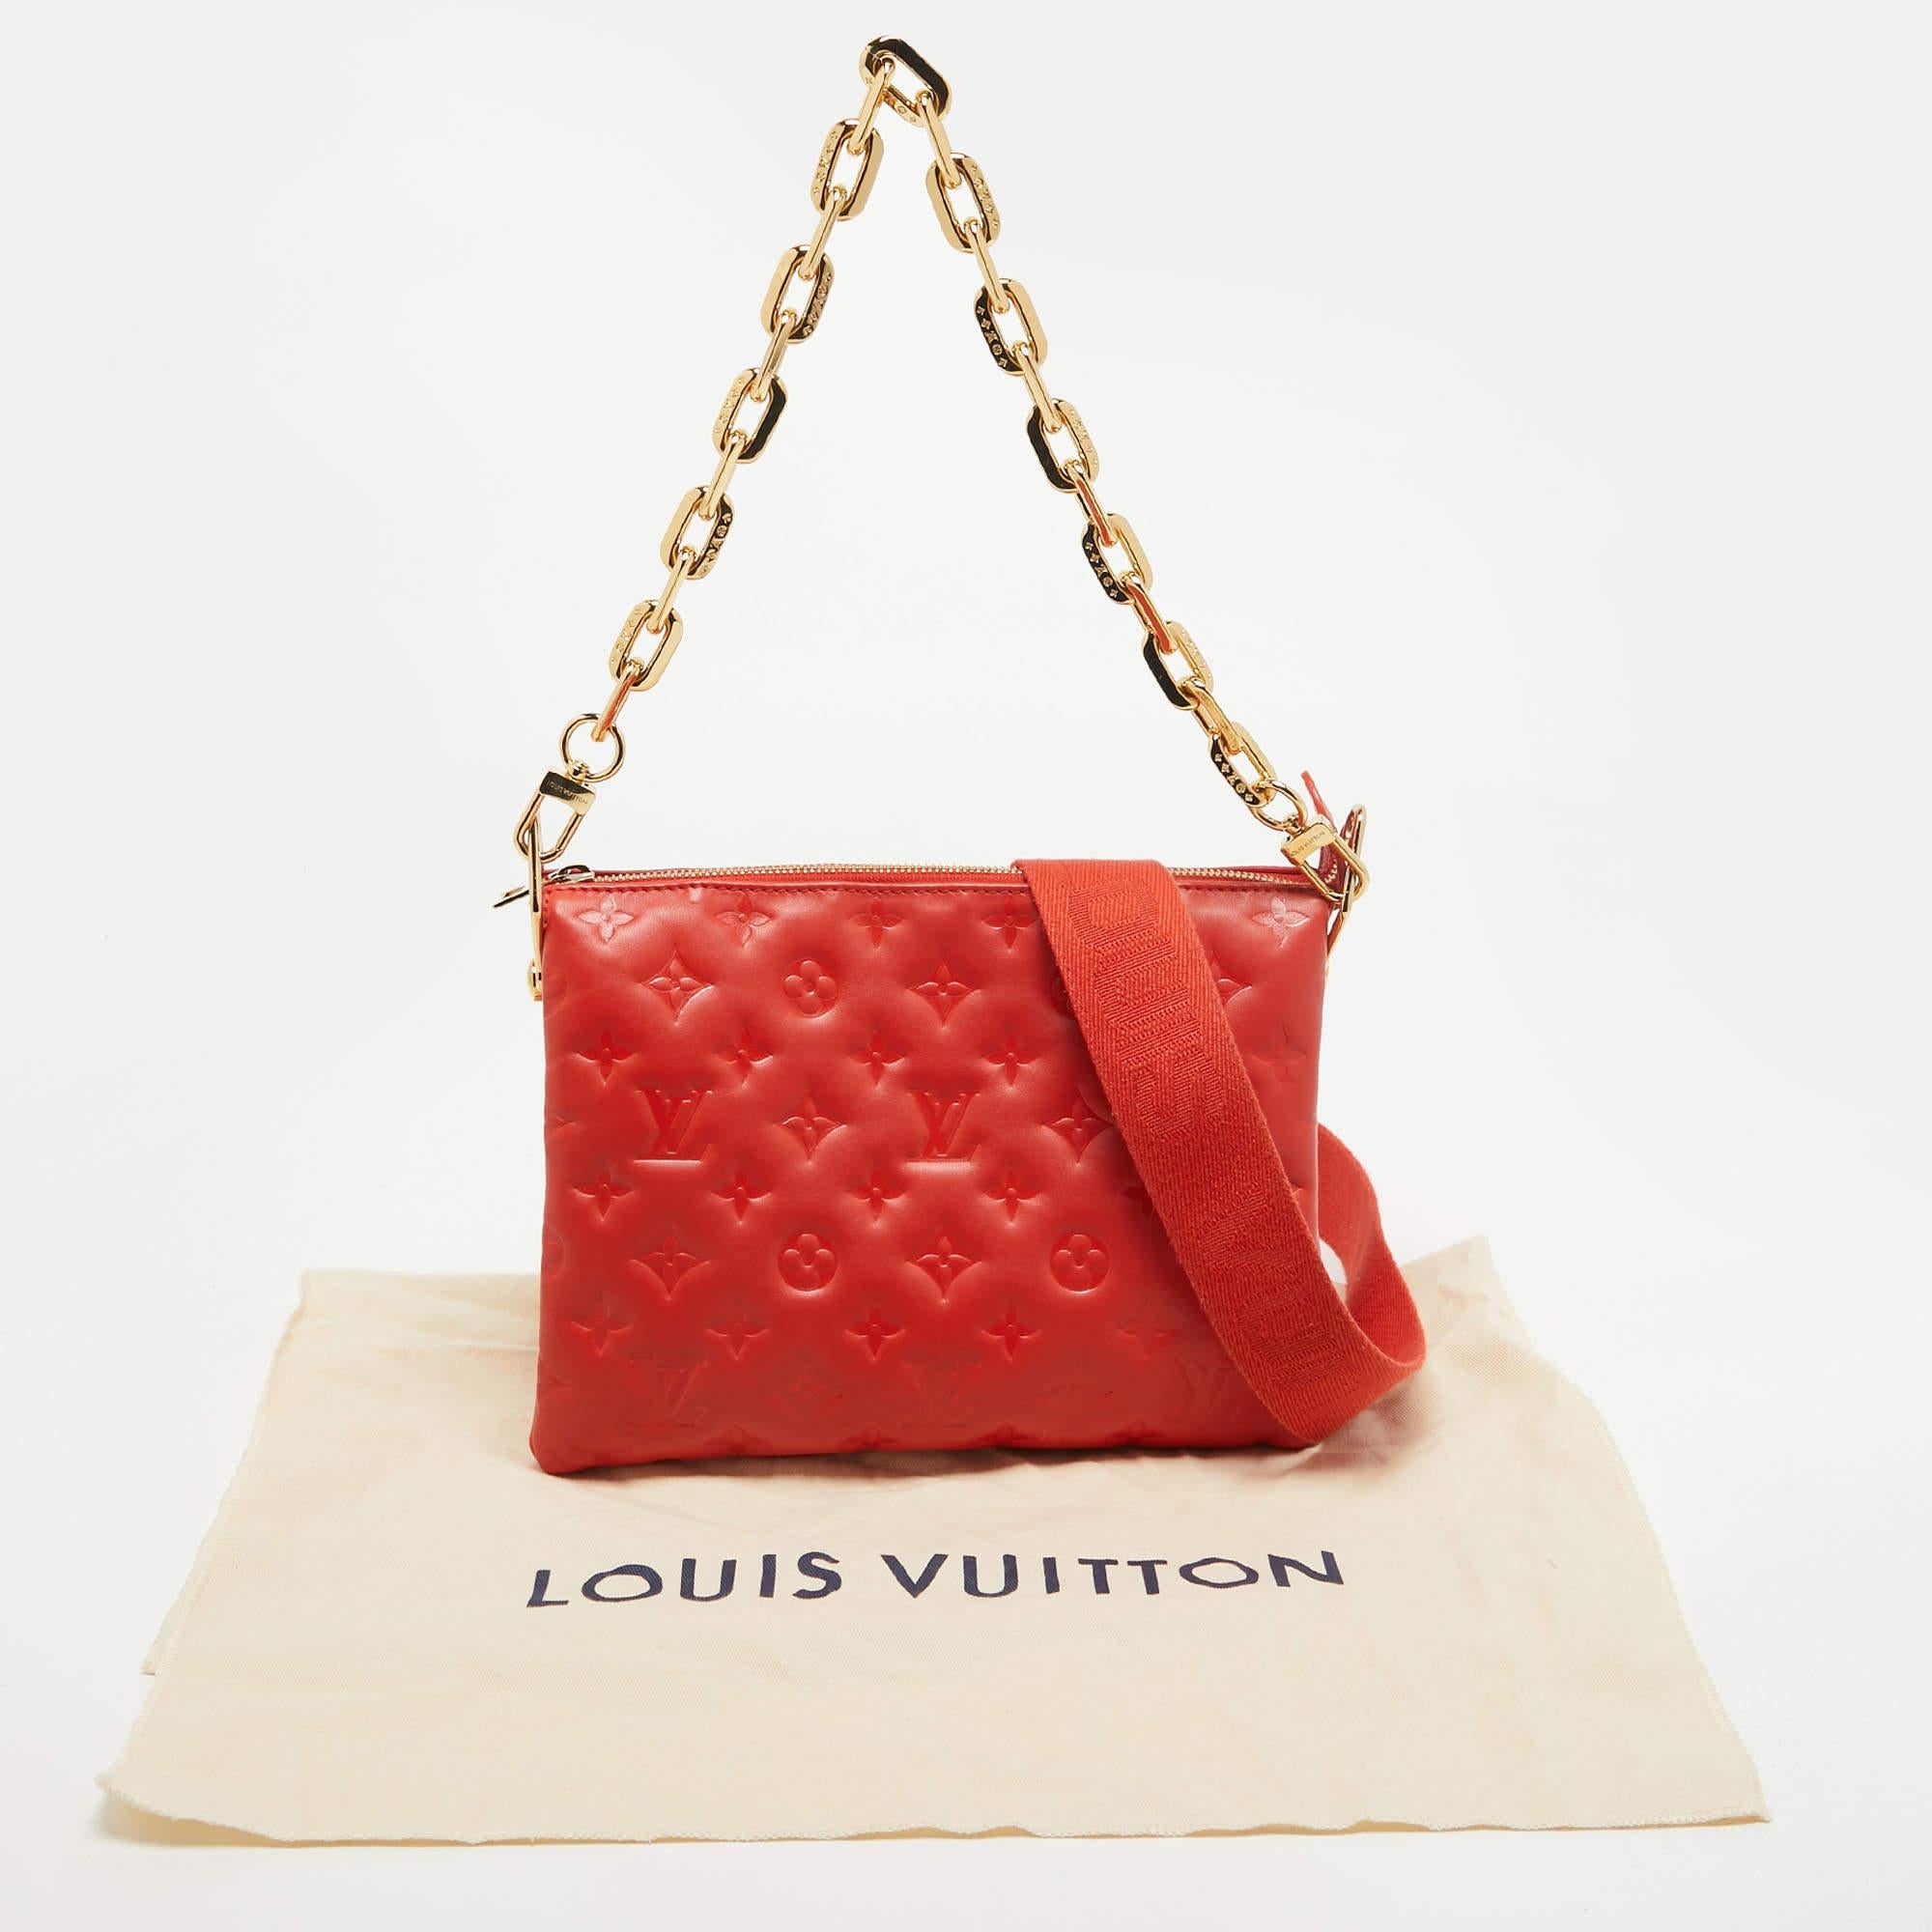 Louis Vuitton Red Monogram Embossed Leather Coussin PM Bag For Sale 8